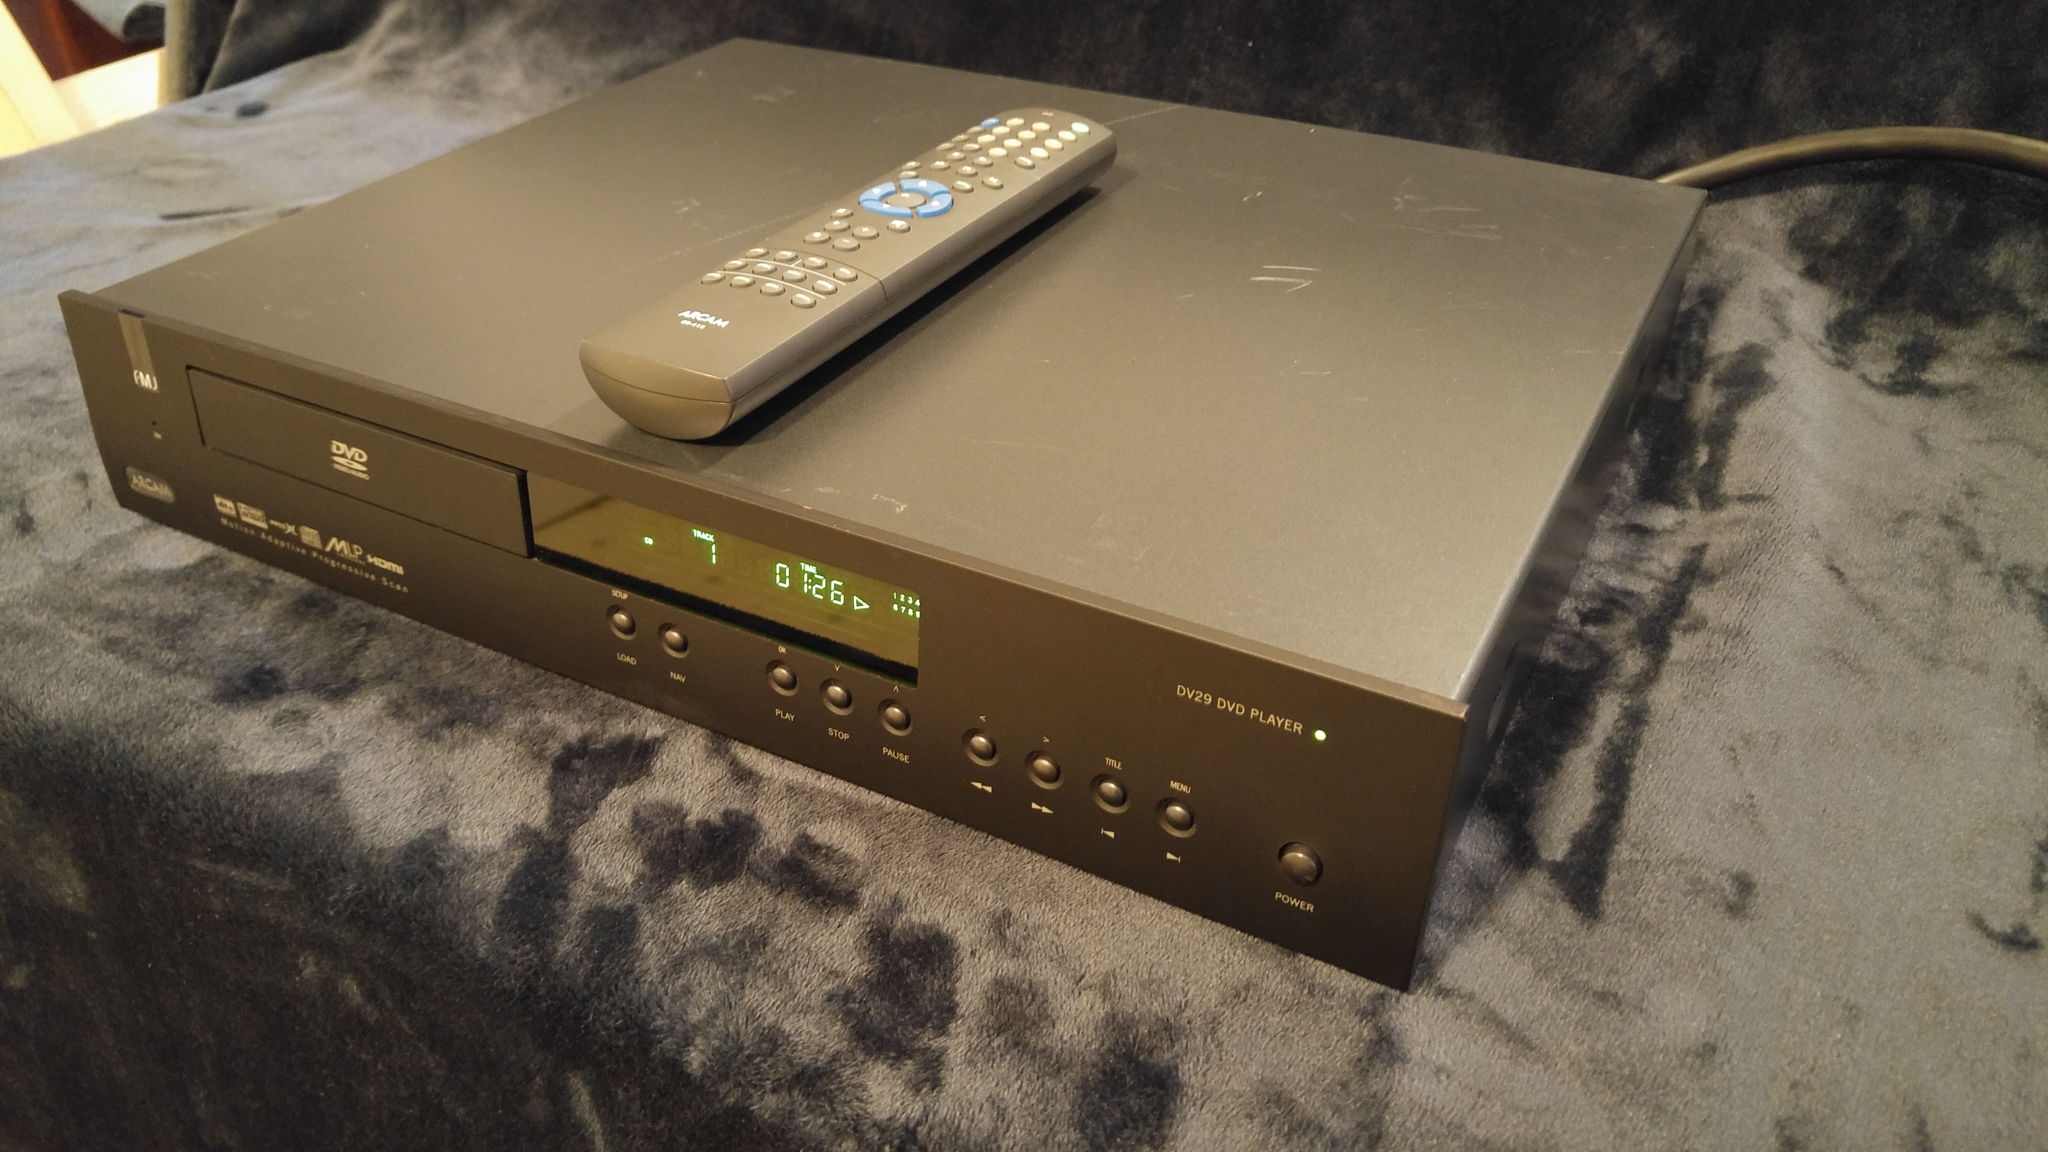 Arcam DV29 ($3250) REFERENCE CLASS disc player 6